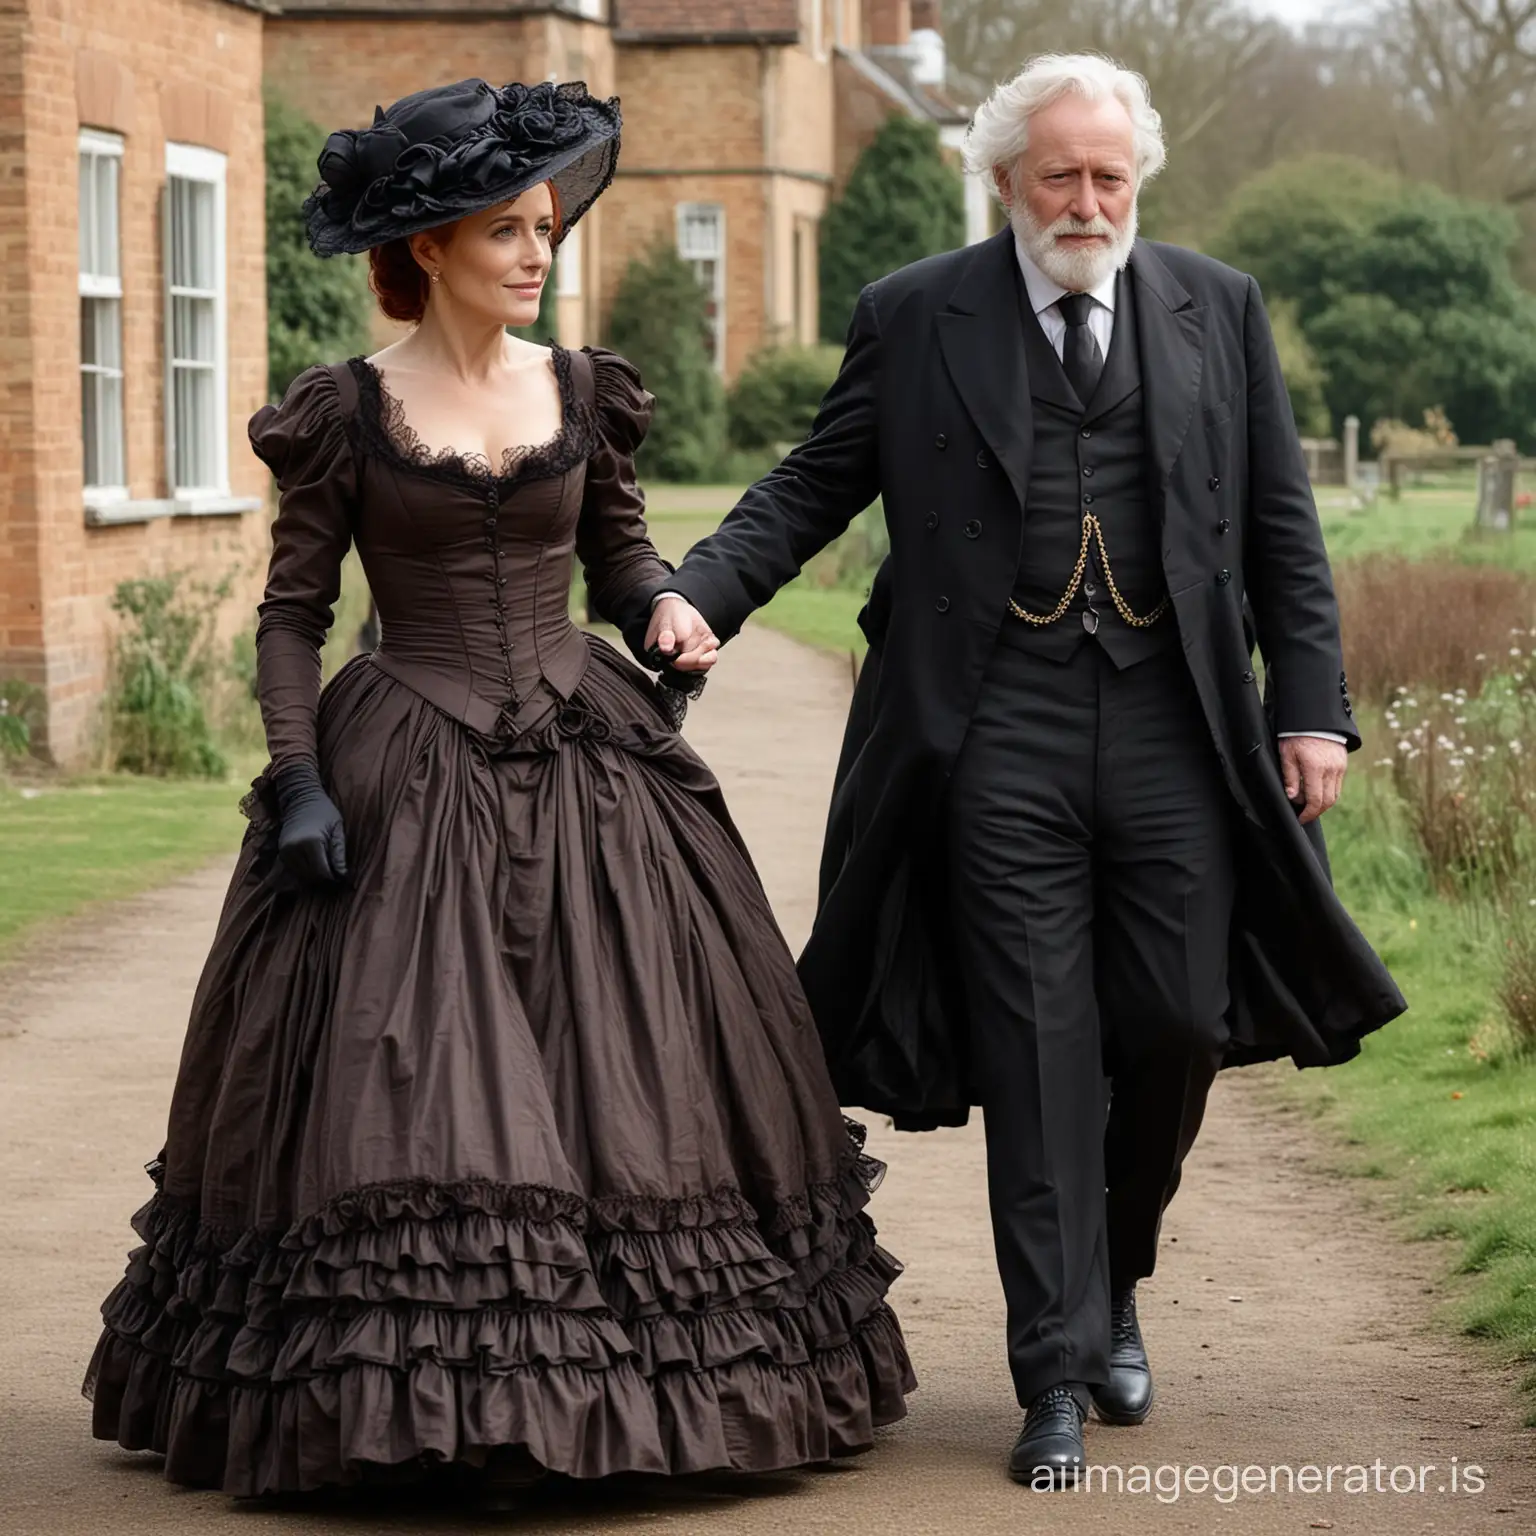 Victorian-Newlywed-Couple-RedHaired-Gillian-Anderson-and-Her-Dapper-Groom